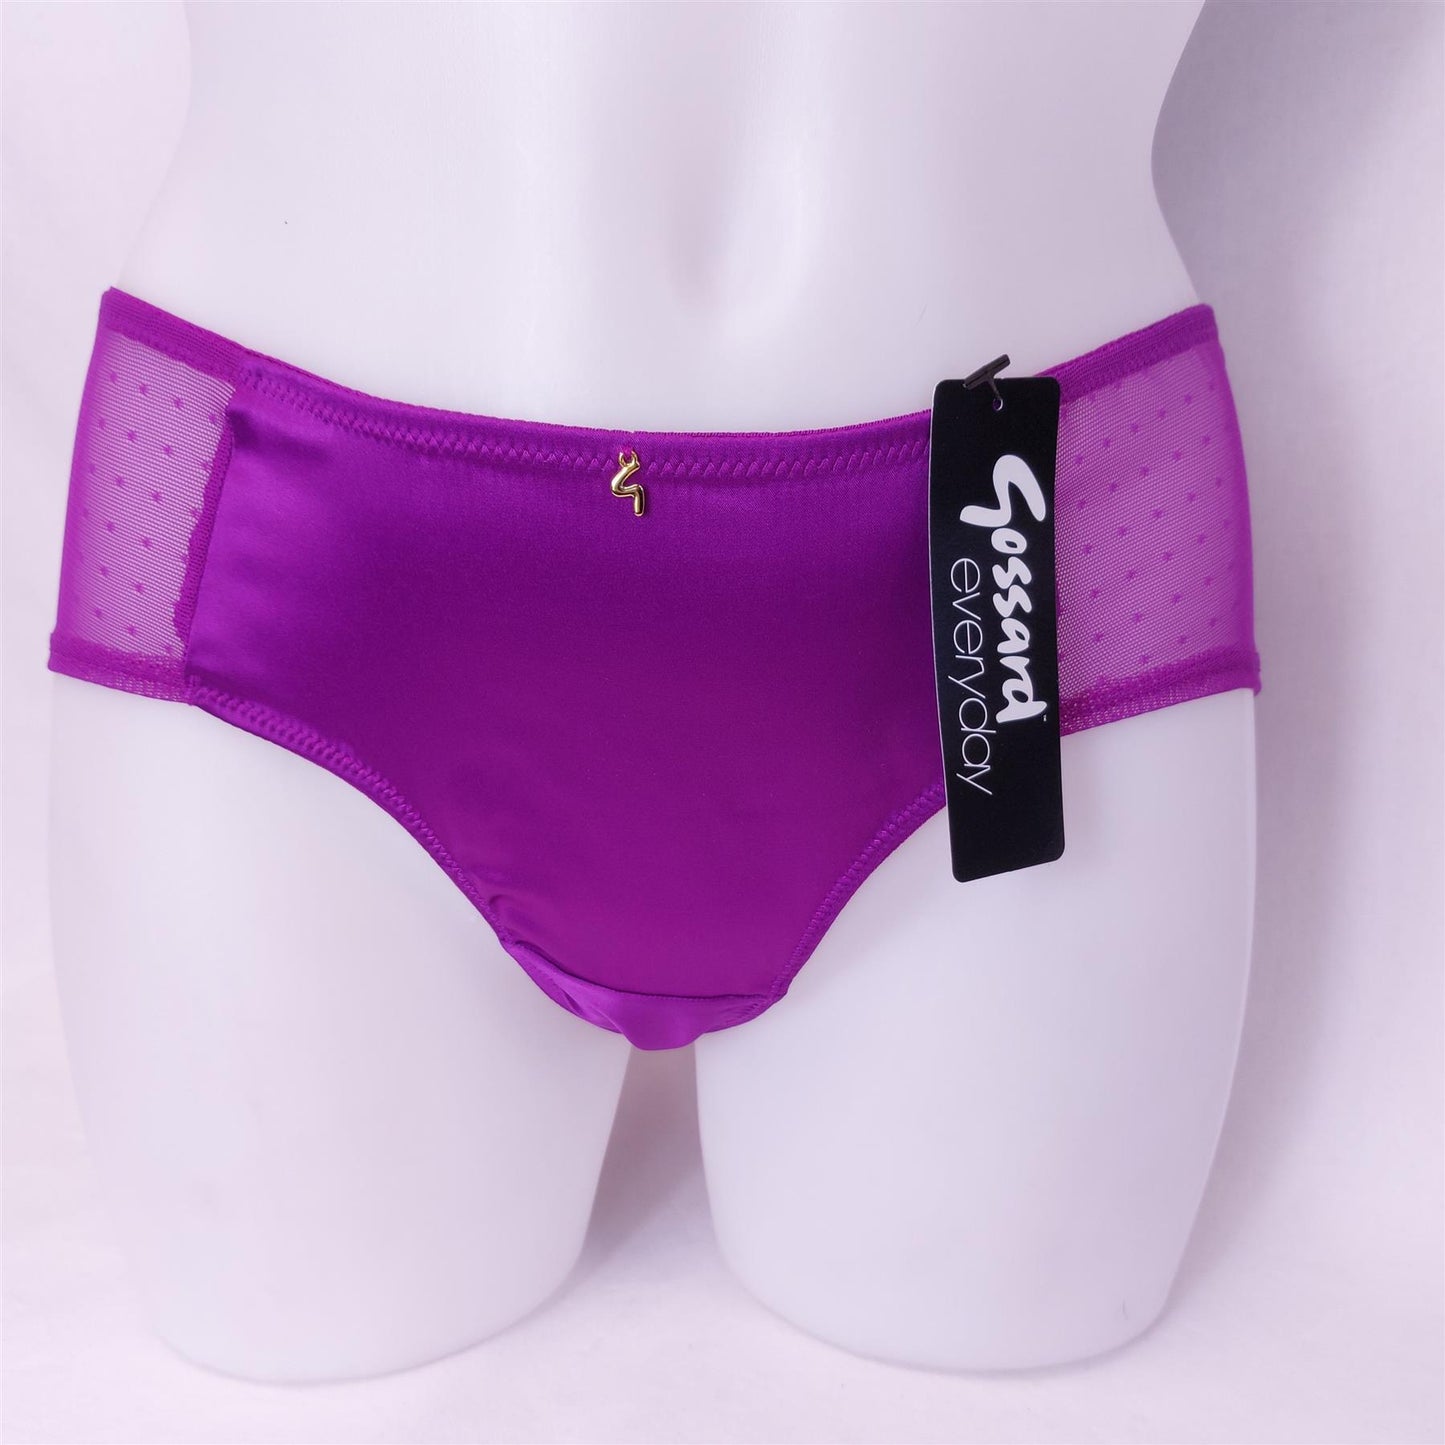 Gossard Everday Dotty Satin Short Brief G114 Radiant Orchid New Lingerie